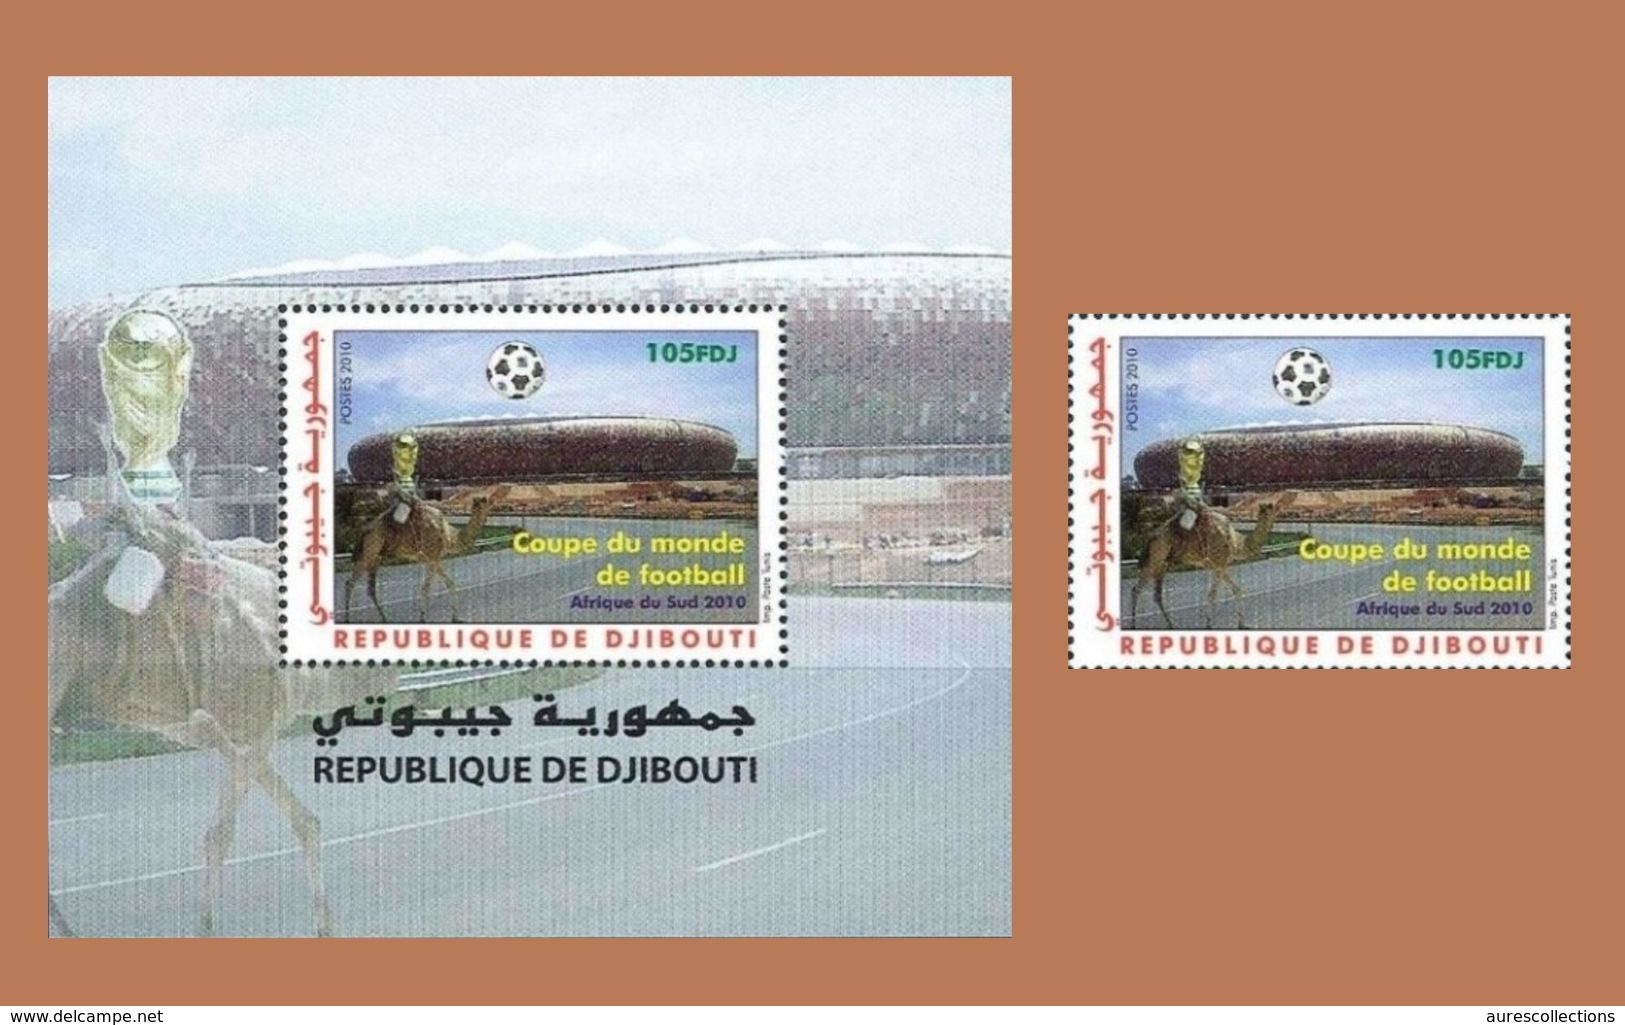 DJIBOUTI 2010 - SOUTH AFRICA SOCCER WORLD CUP COUPE DU MONDE FOOTBALL BLOC S/S SHEET + 1 VAL ULTRA RARE - MNH ** - 2010 – South Africa